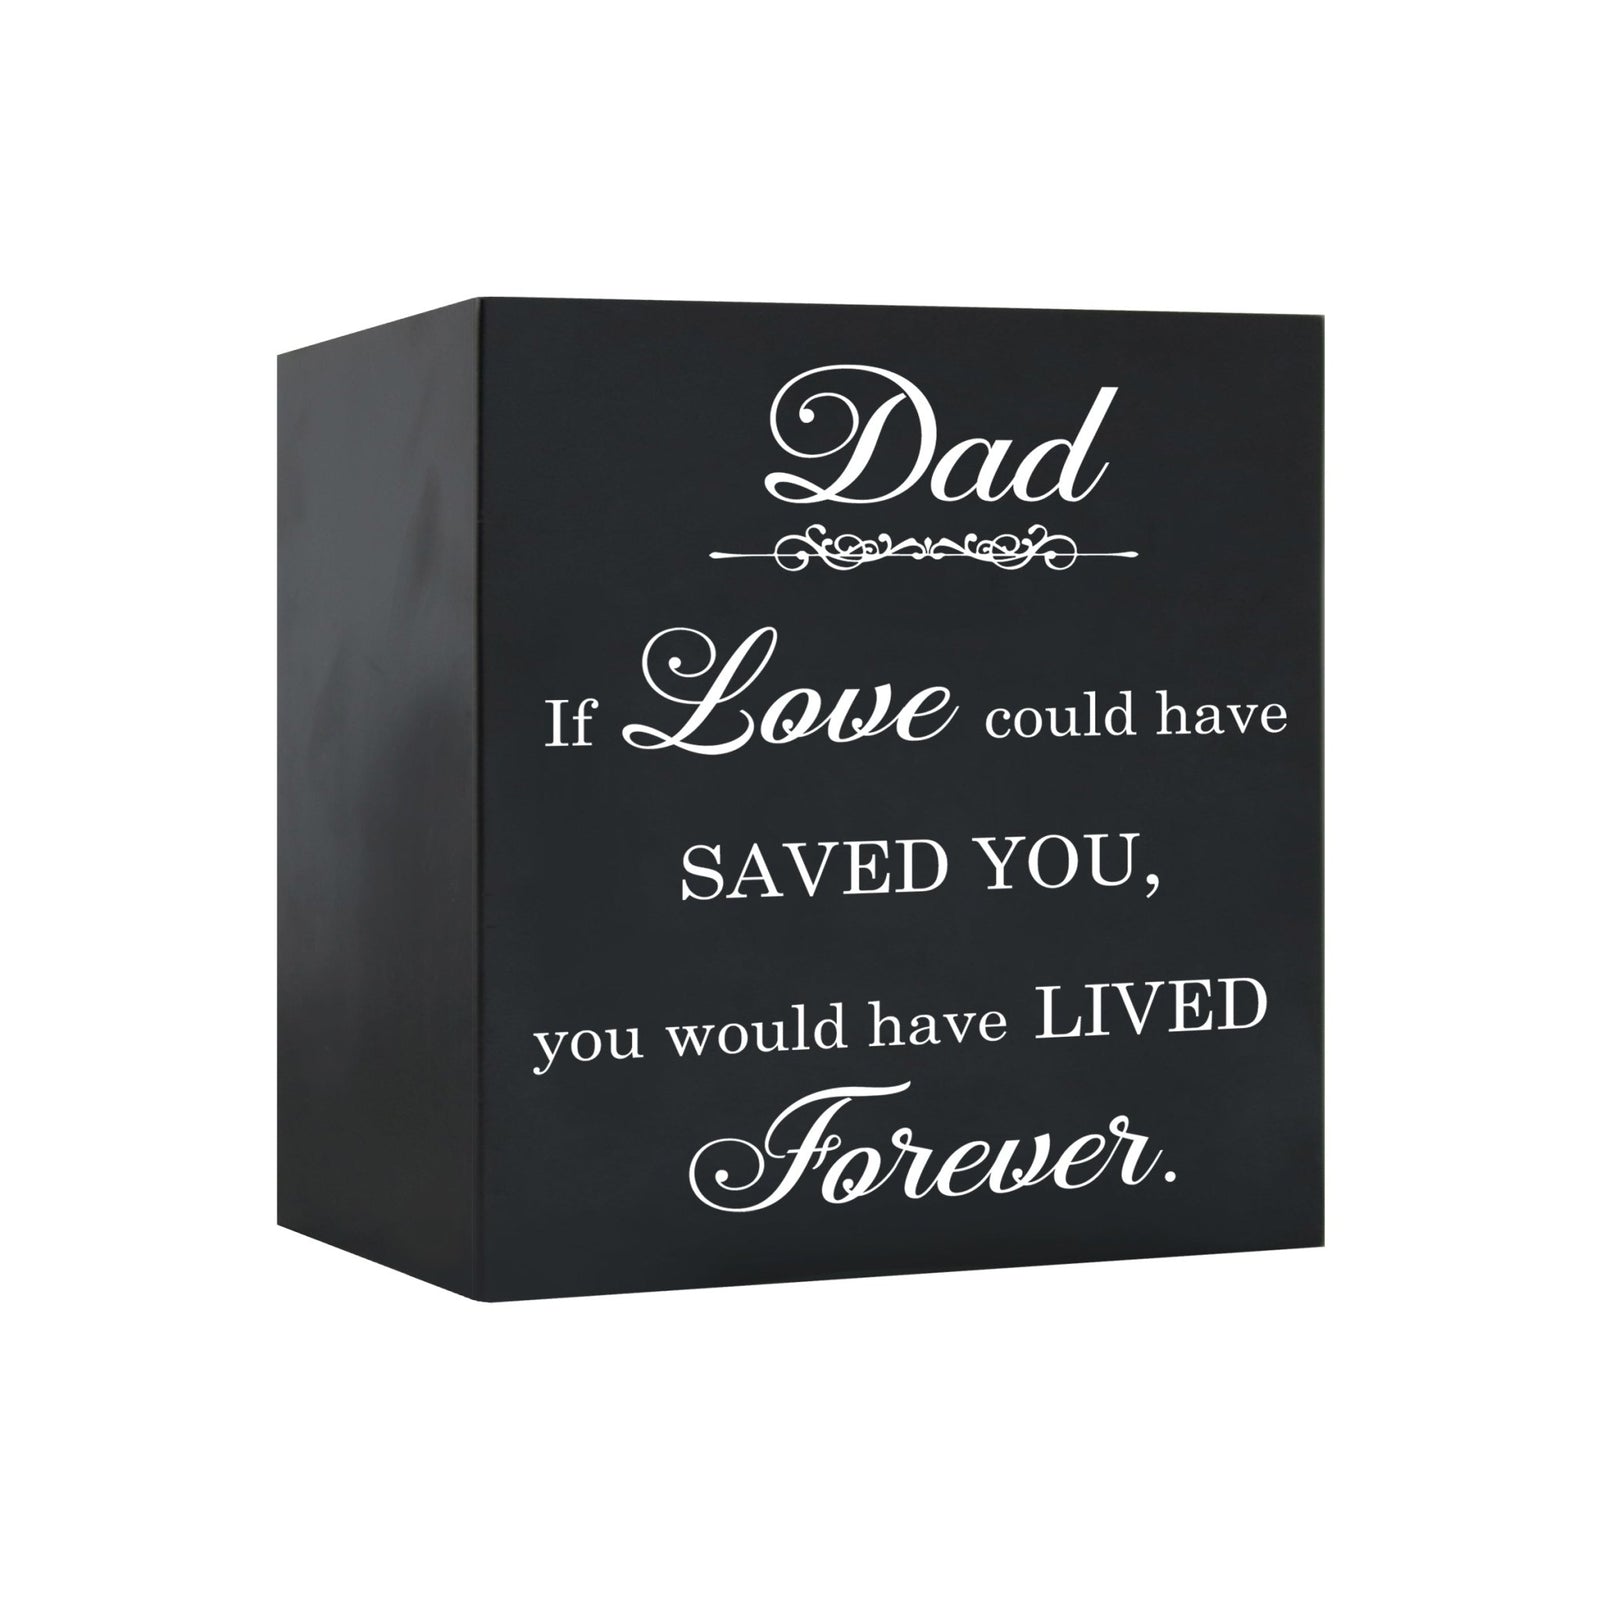 Memorial Bereavement Keepsake Cremation Shadow Box and Urn 6x6in Holds 53 Cu Inches Of Human Ashes Dad, If Love Could - LifeSong Milestones